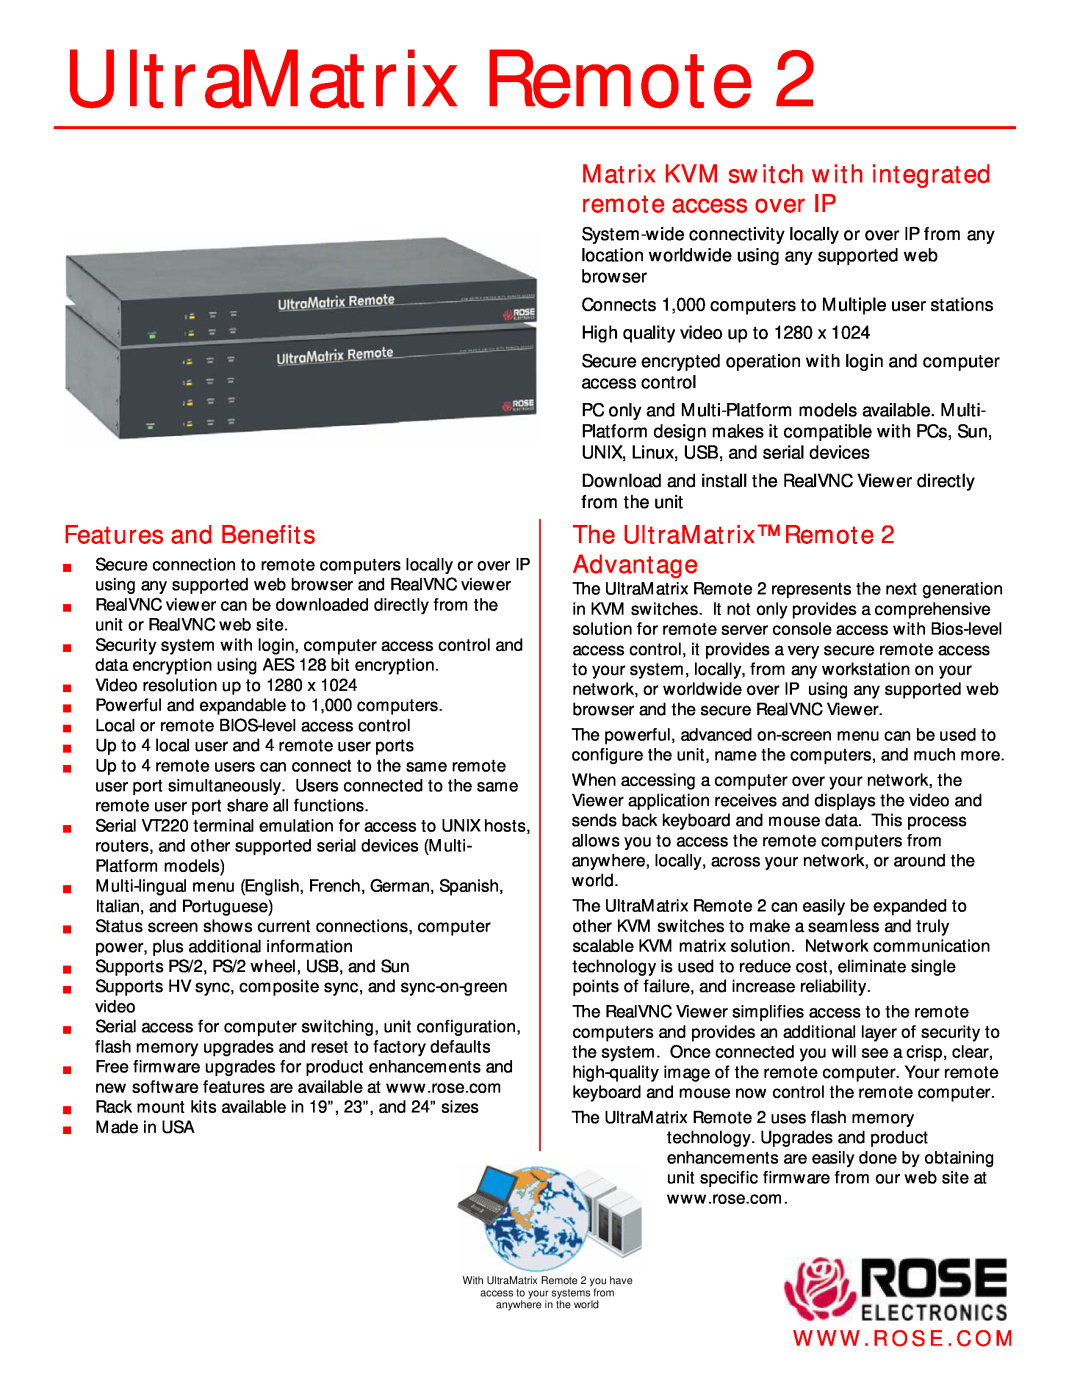 Rose electronic 2 manual Matrix KVM switch with integrated remote access over IP, Features and Benefits 